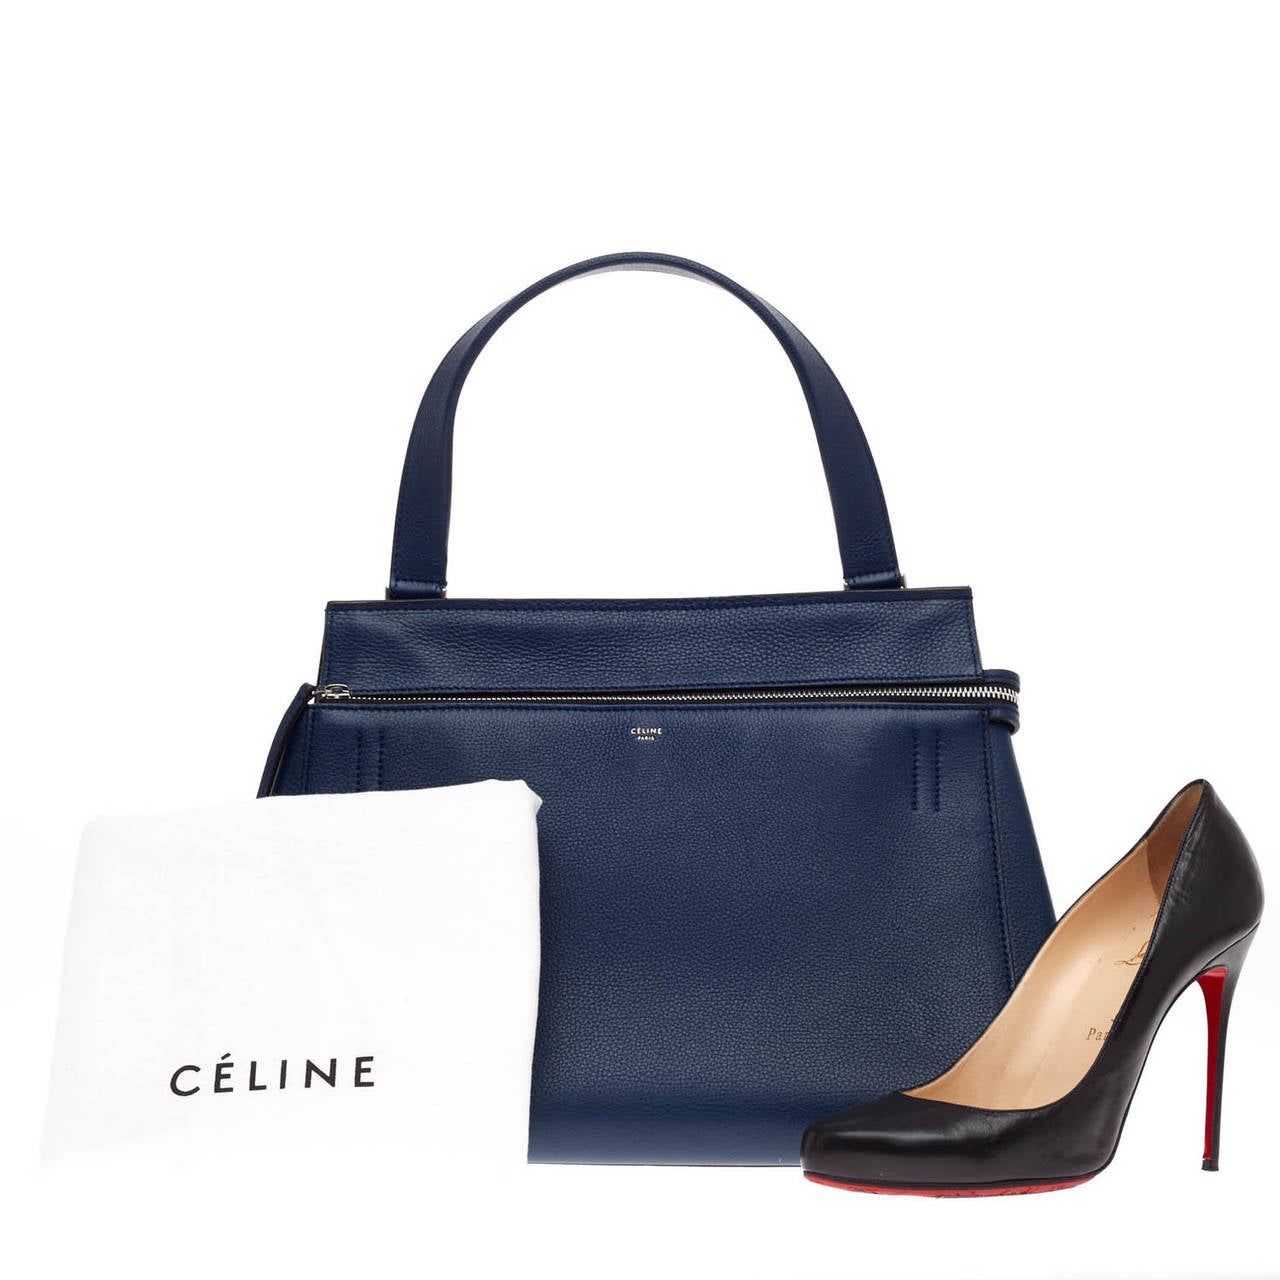 This authentic Celine Edge in size Medium is striking with its beautiful structure. The rich navy blue hue is contrasted with black zipper detail. The leather interior features two slip pockets and a zipped wall pocket. The base of the bag has four